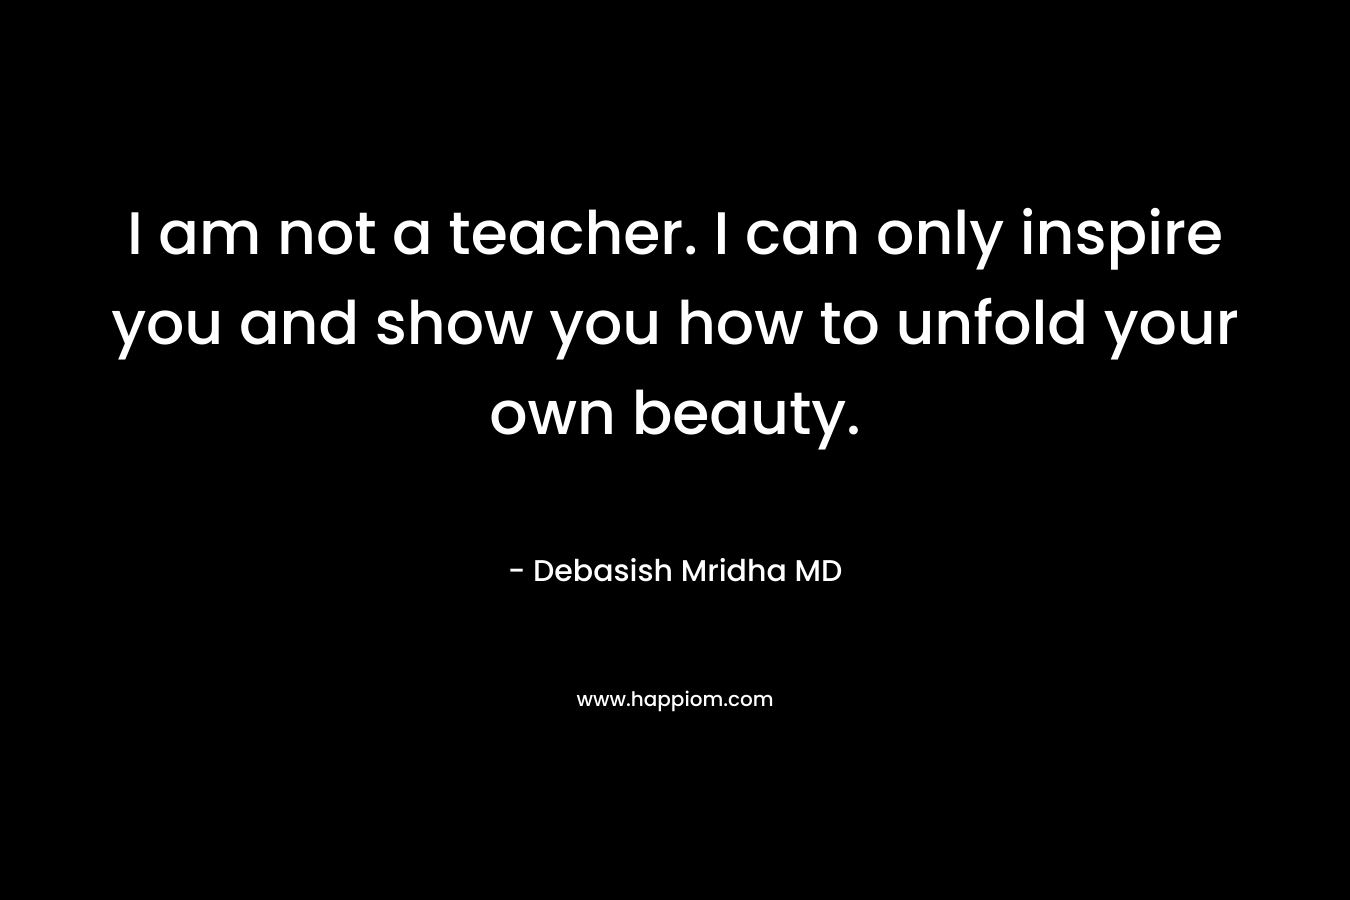 I am not a teacher. I can only inspire you and show you how to unfold your own beauty.